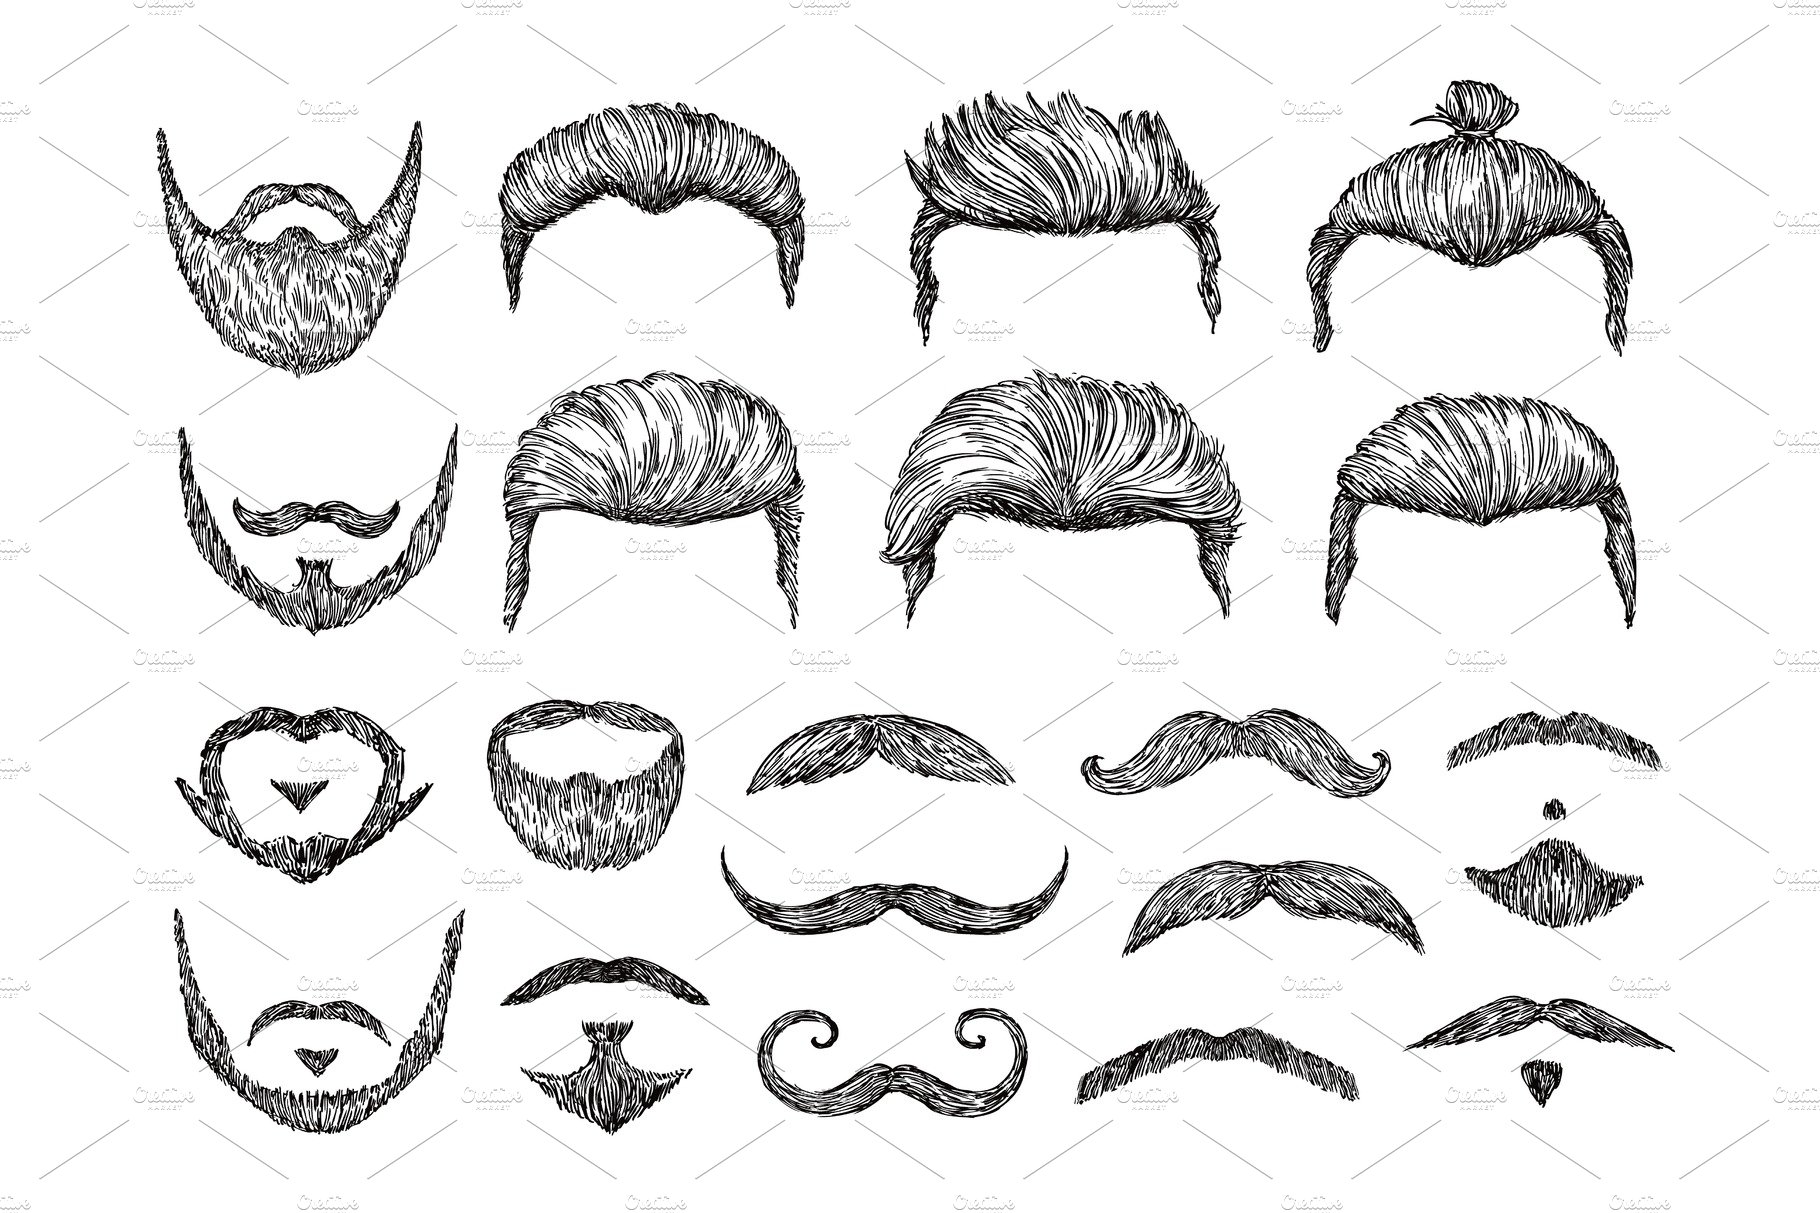 Male hairs sketch. Beard, mustache cover image.